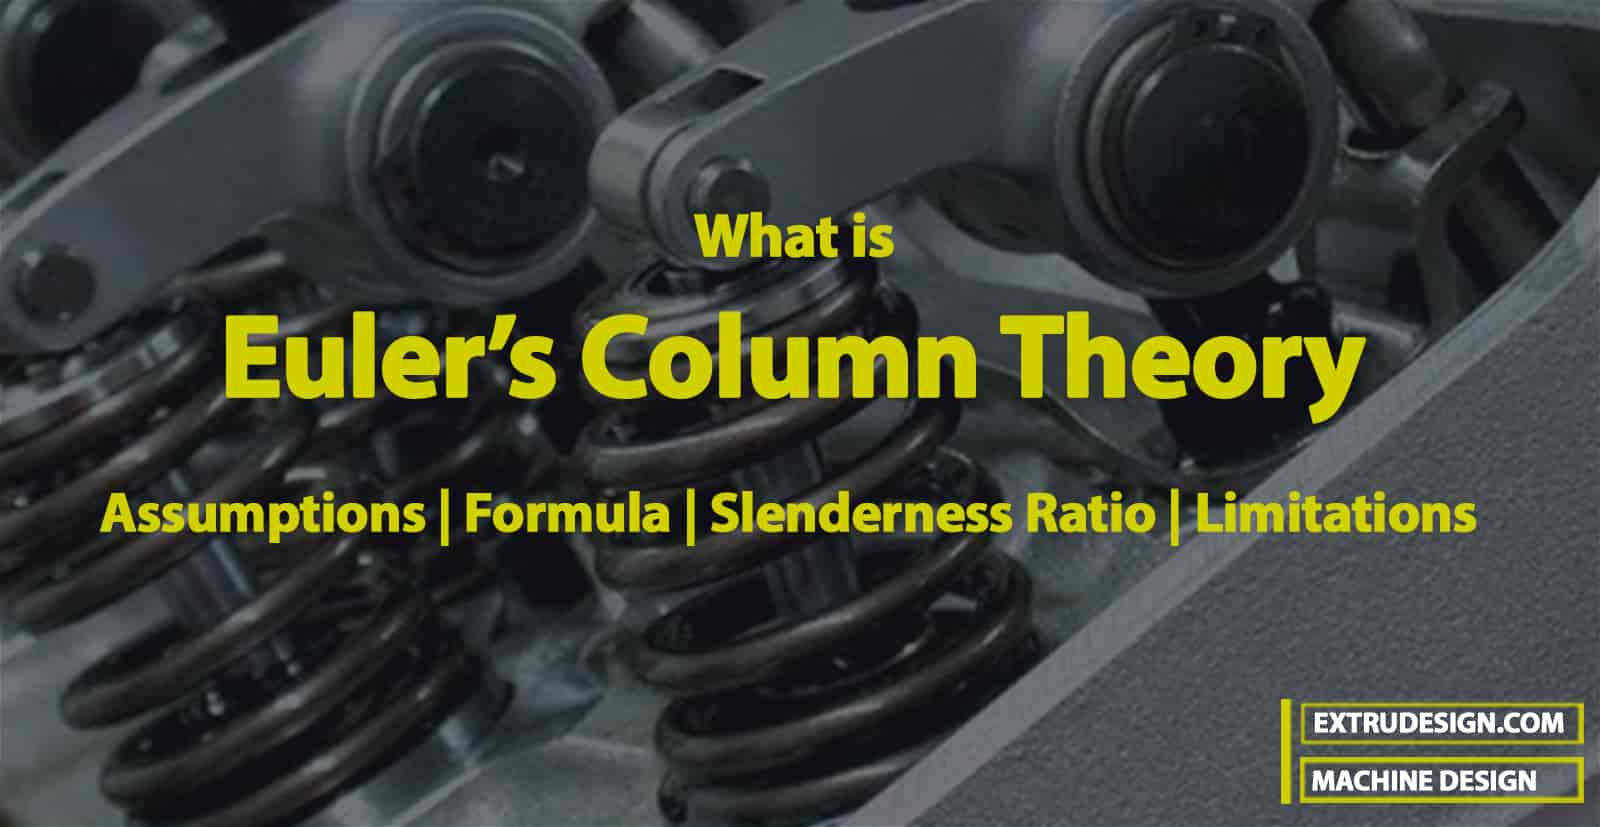 What is Euler’s Column Theory?